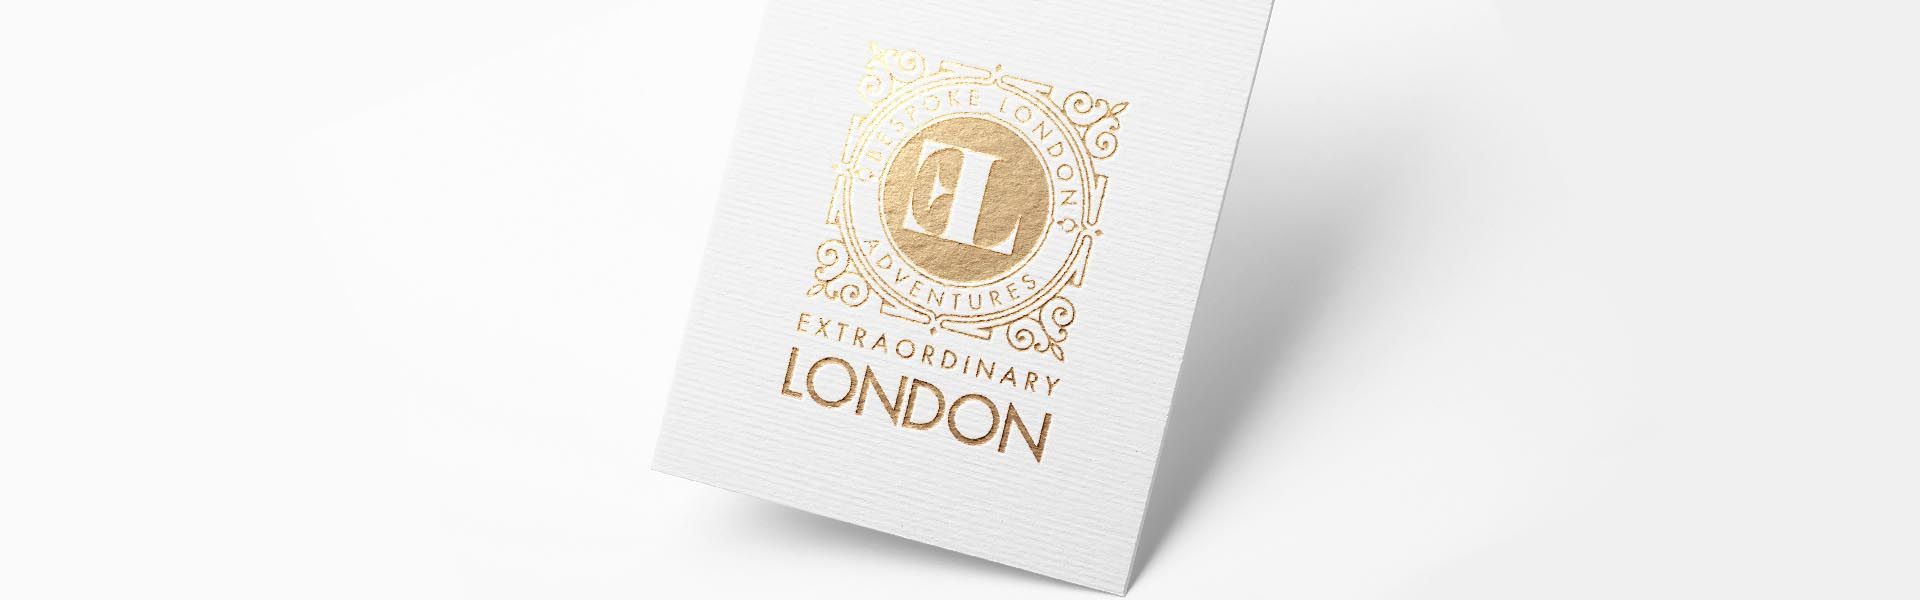 A white card with a gold logo on it is sitting on a white surface.